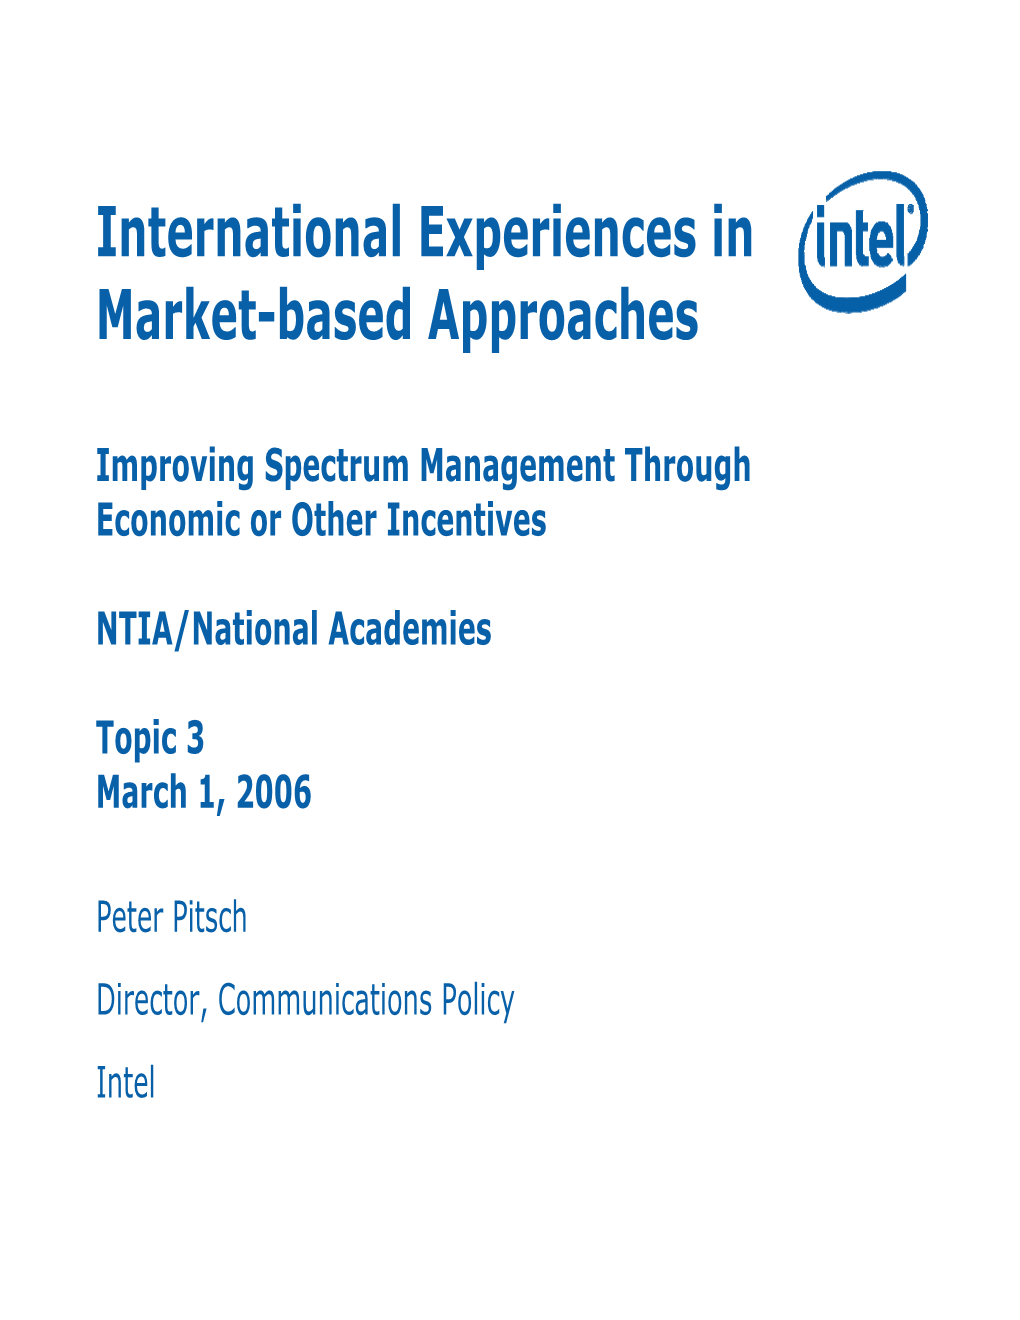 International Experiences in Market-Based Approaches